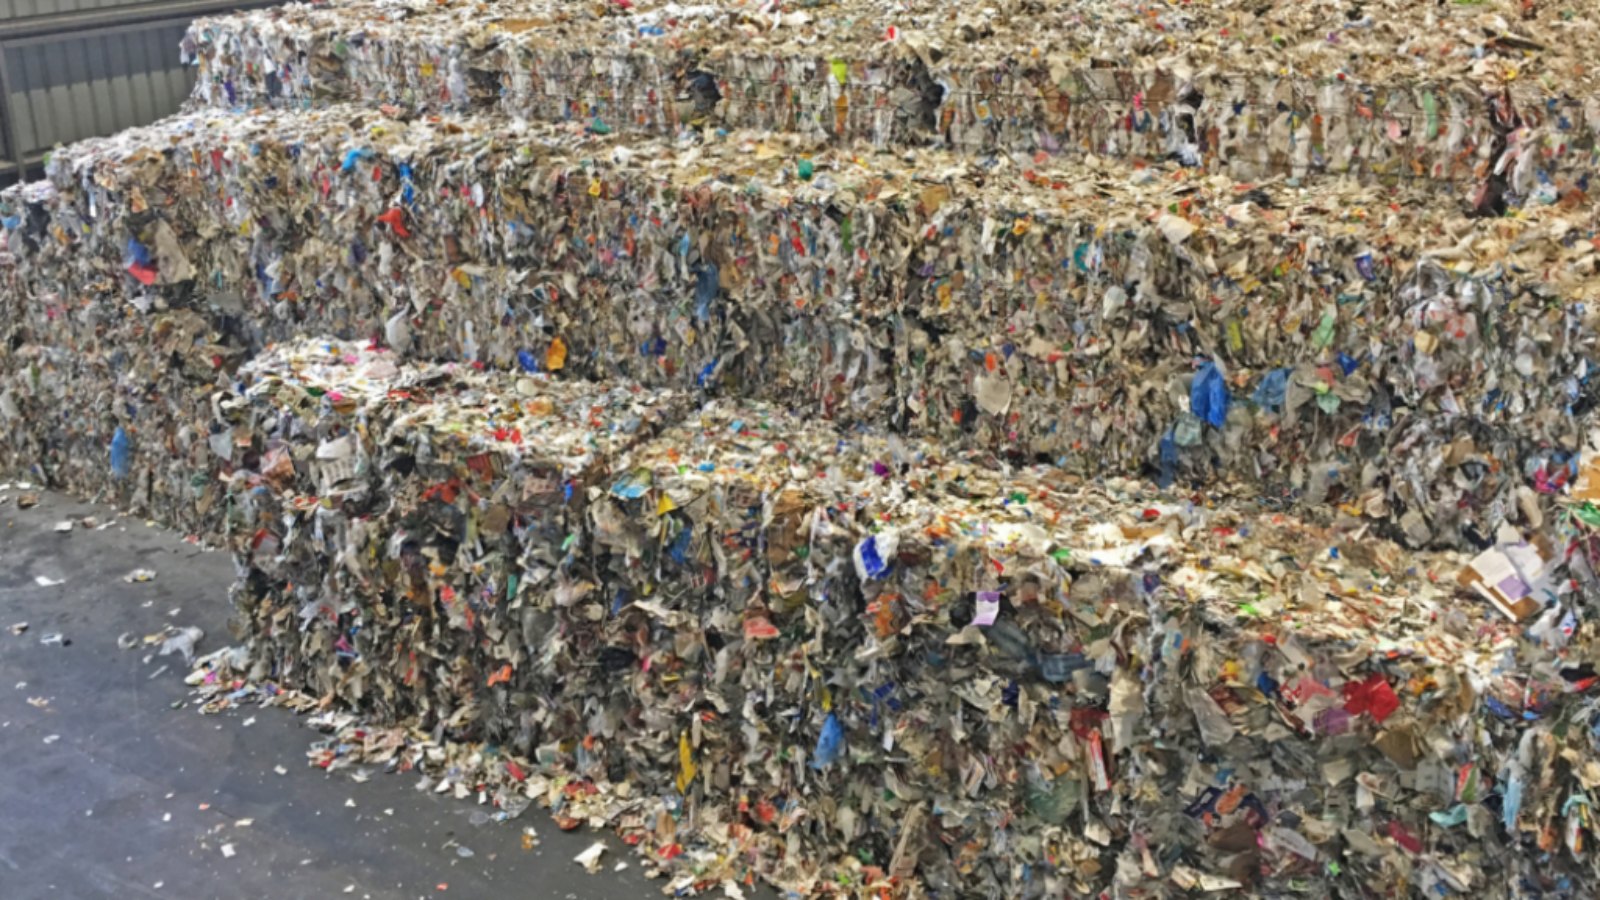 Giant blocks of post consumer waste. As of 2018, less than 9% of the plastic produced was recycled.